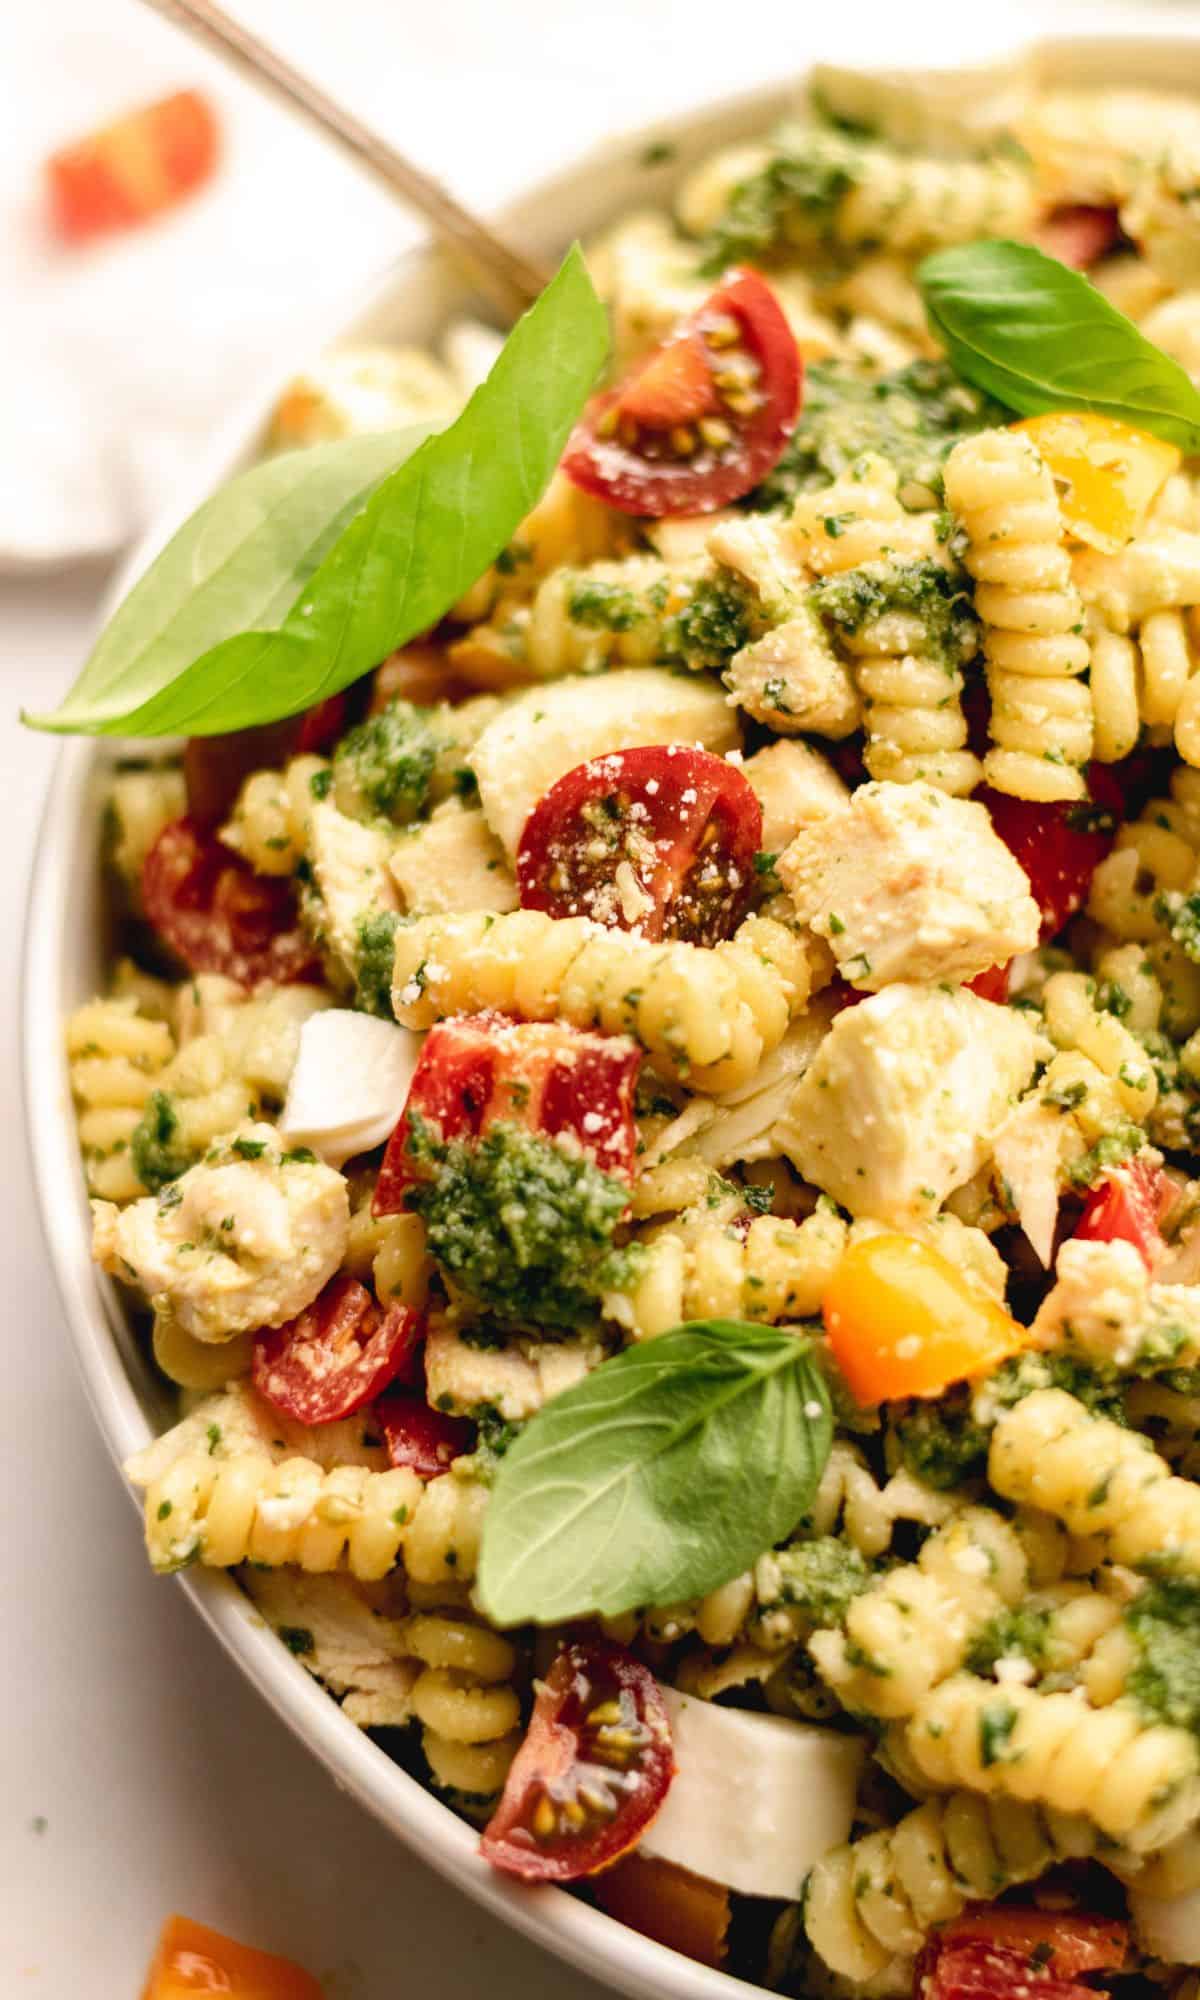 Pesto pasta salad topped with basil leaves in a white bowl.